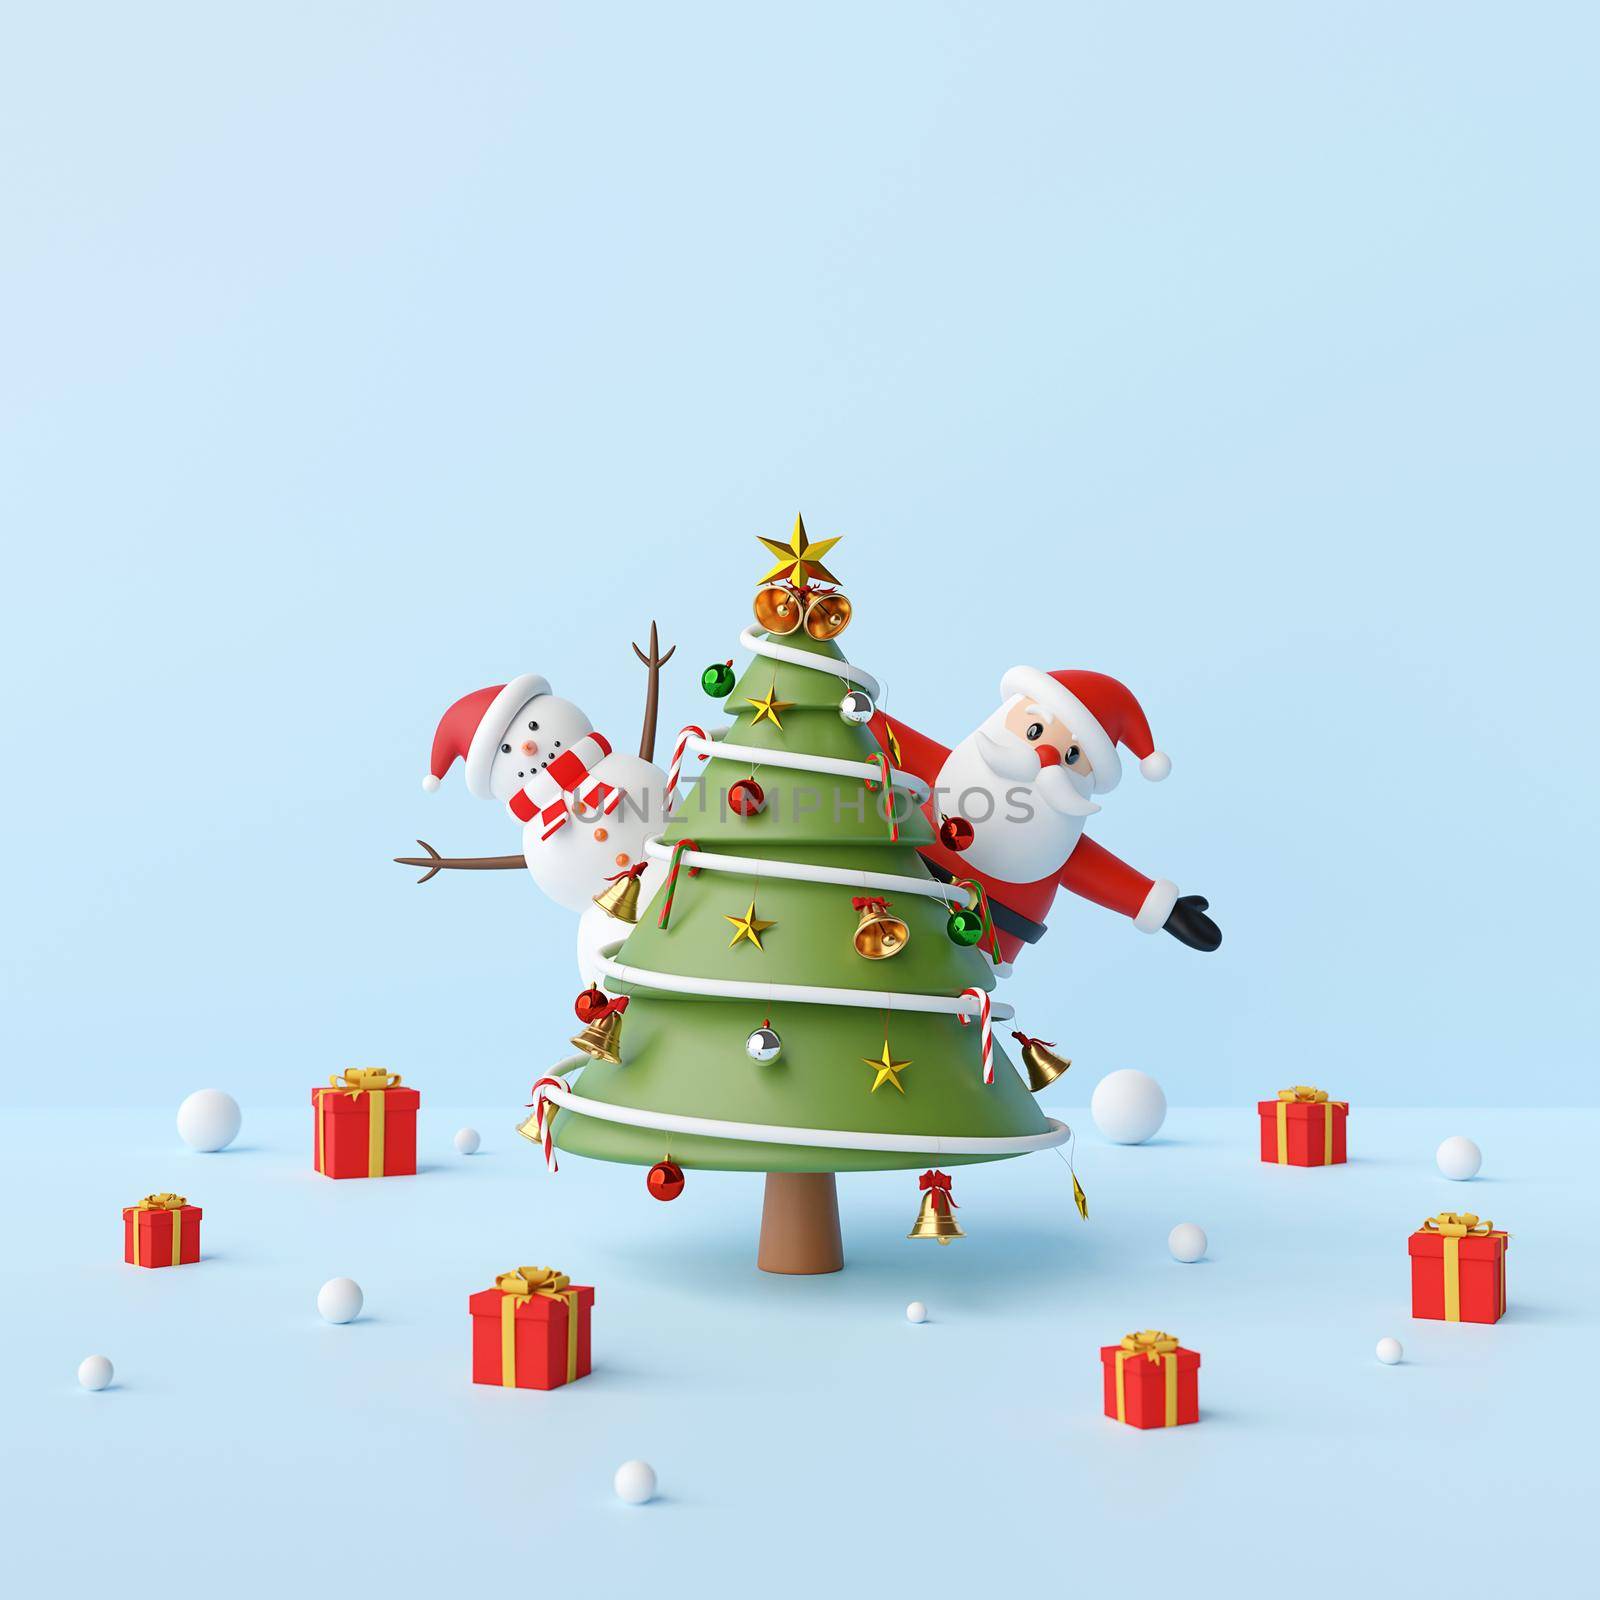 Merry Christmas, Party with Santa Claus, snowman and Christmas tree on a blue background, 3d rendering